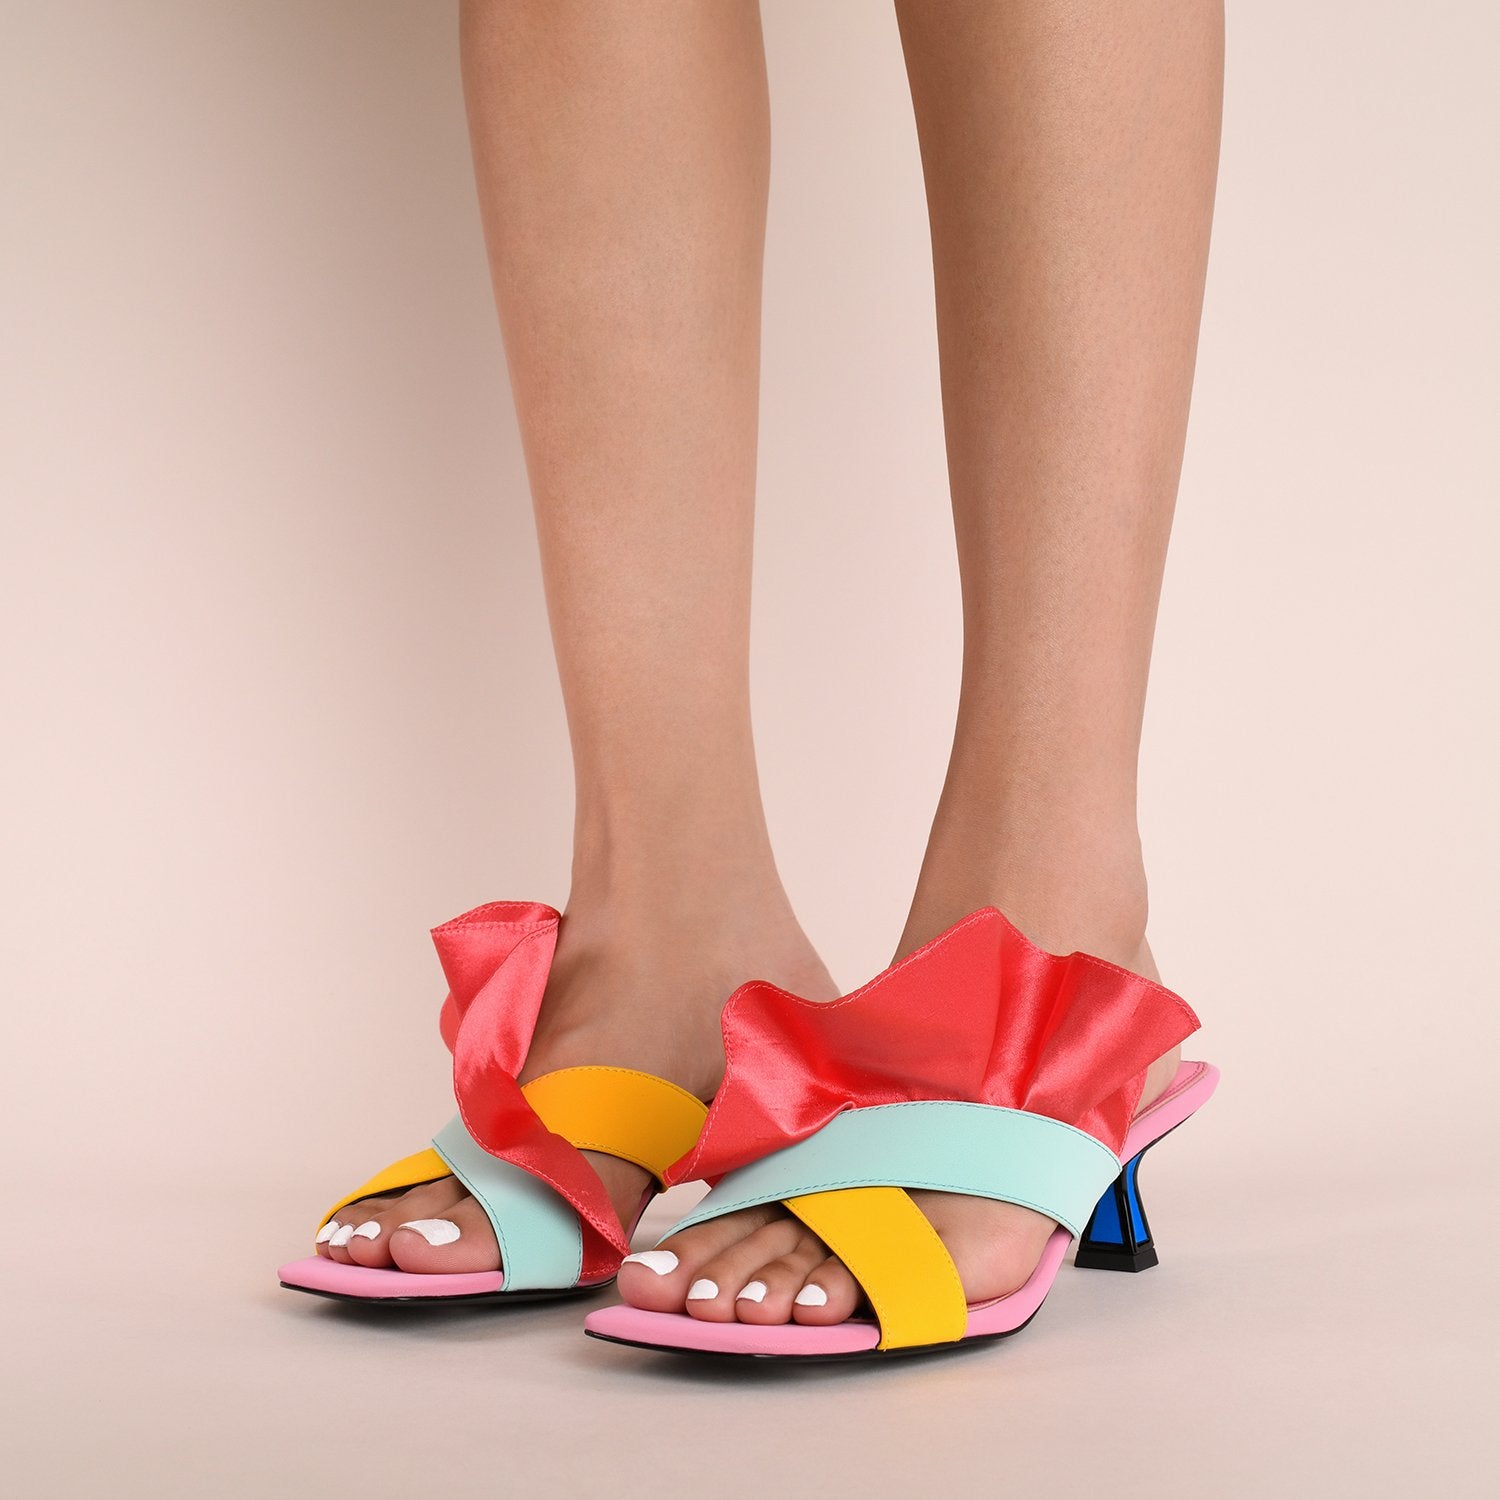 Front outer side view of a model wearing a pair of the kat maconie dia kitten heel. This slip on heel features a pink sole, a tiny blue heel outlined with black, two cross over straps, and a pink/red satin ruffle attached to the upper.